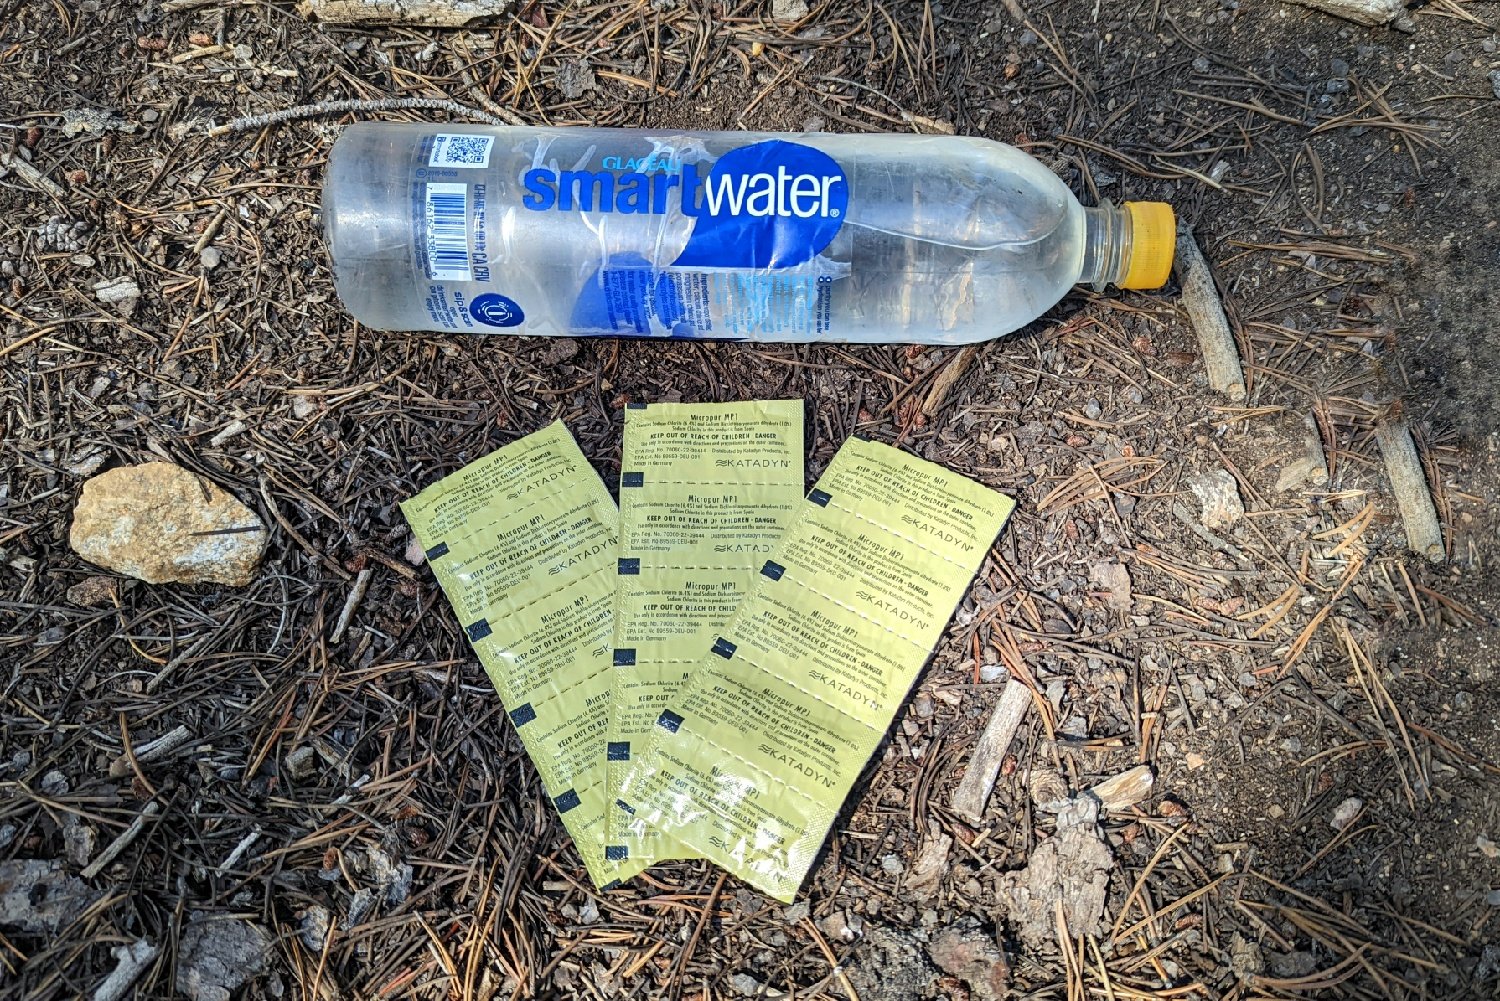 Packets of Katadyn Micropur Tabs laying on the ground in front of a Smartwater bottle